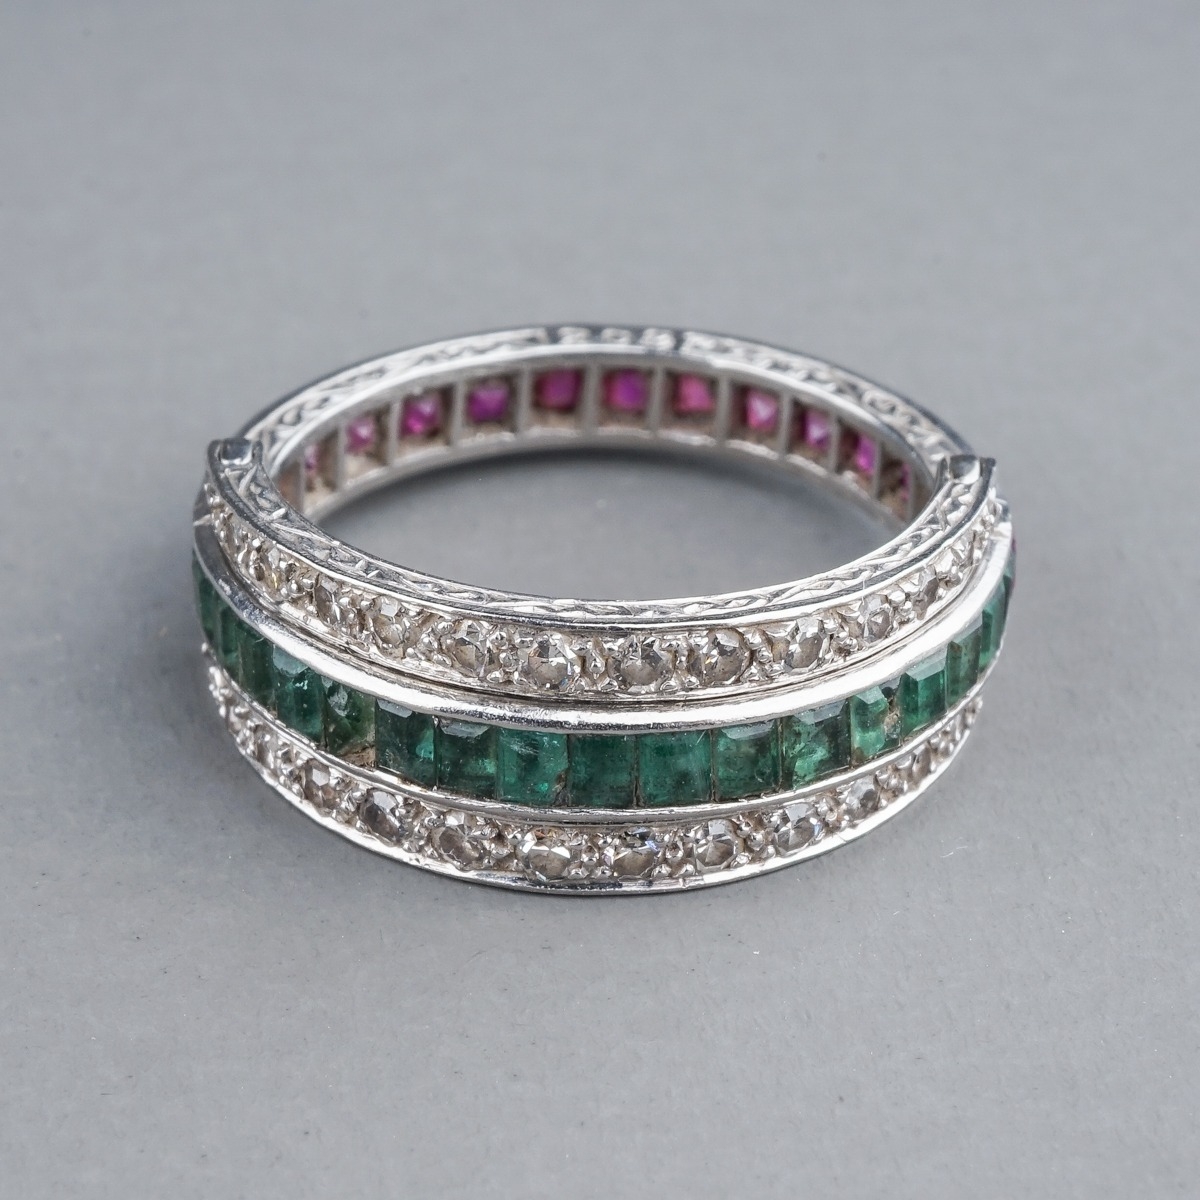 An Art Deco platinum diamond ruby and emerald swivel or flip ring, set with calibre cut rubies and - Image 2 of 6